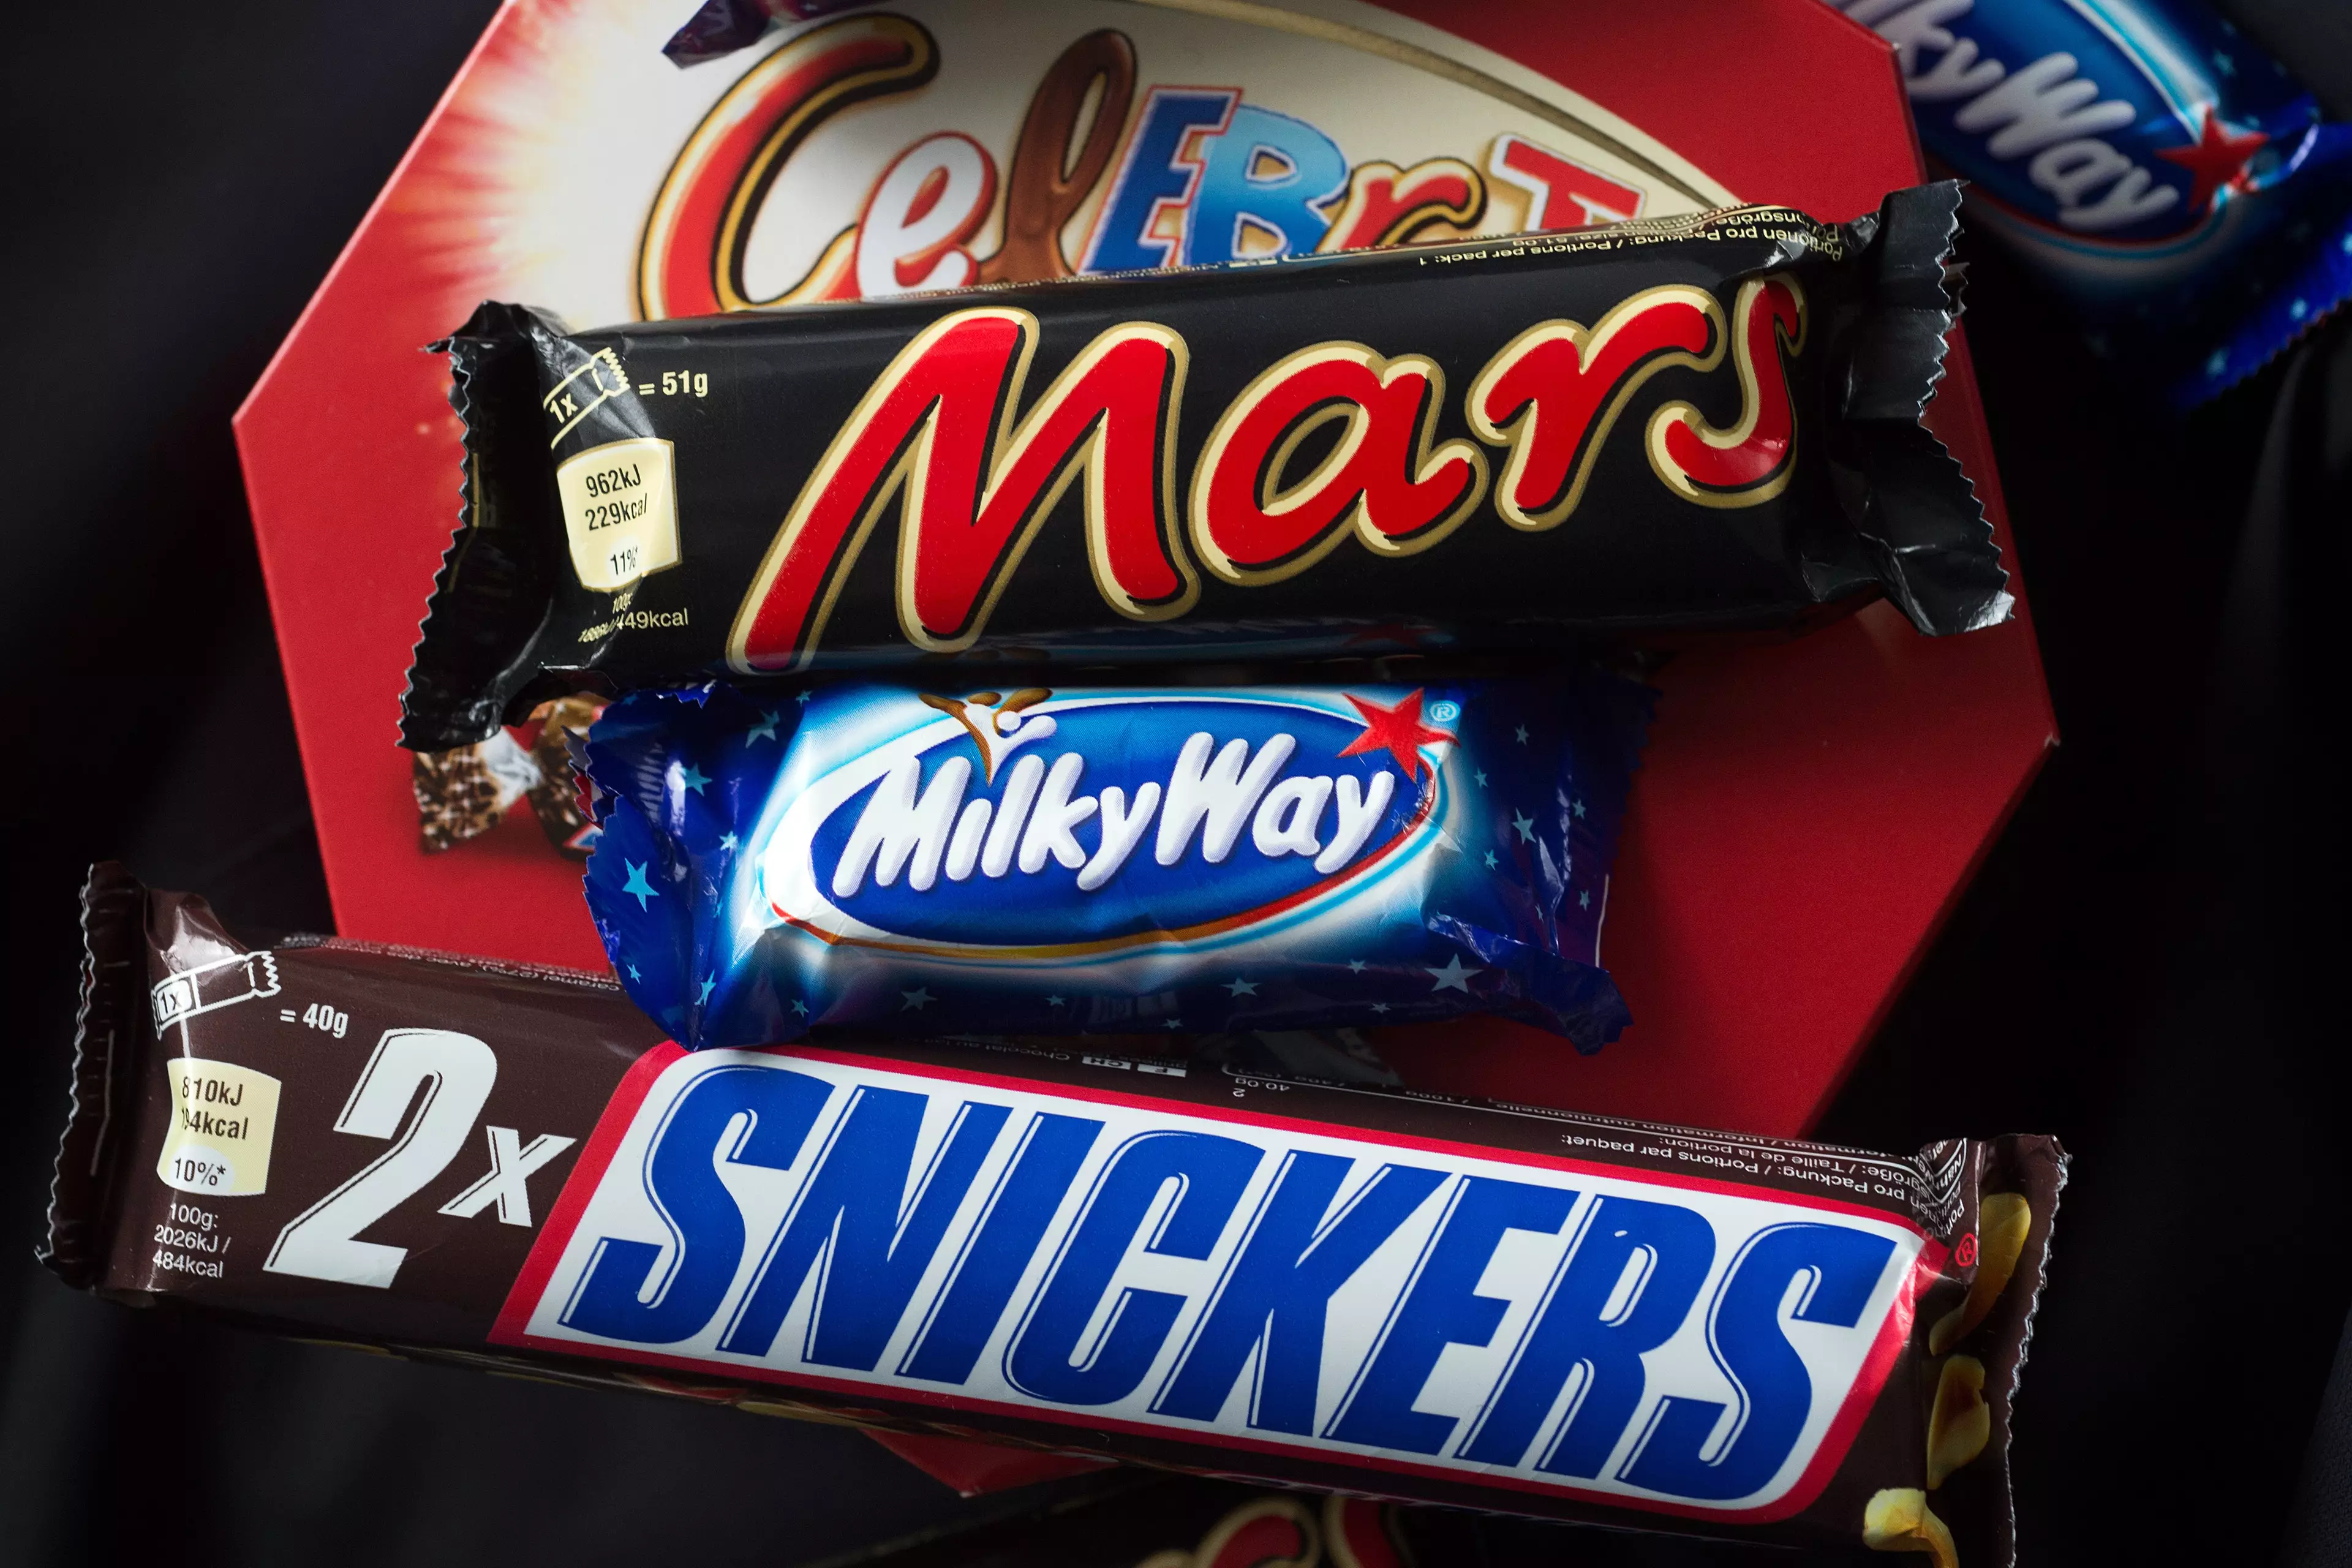 Mars brands include Snickers and Milky Way.